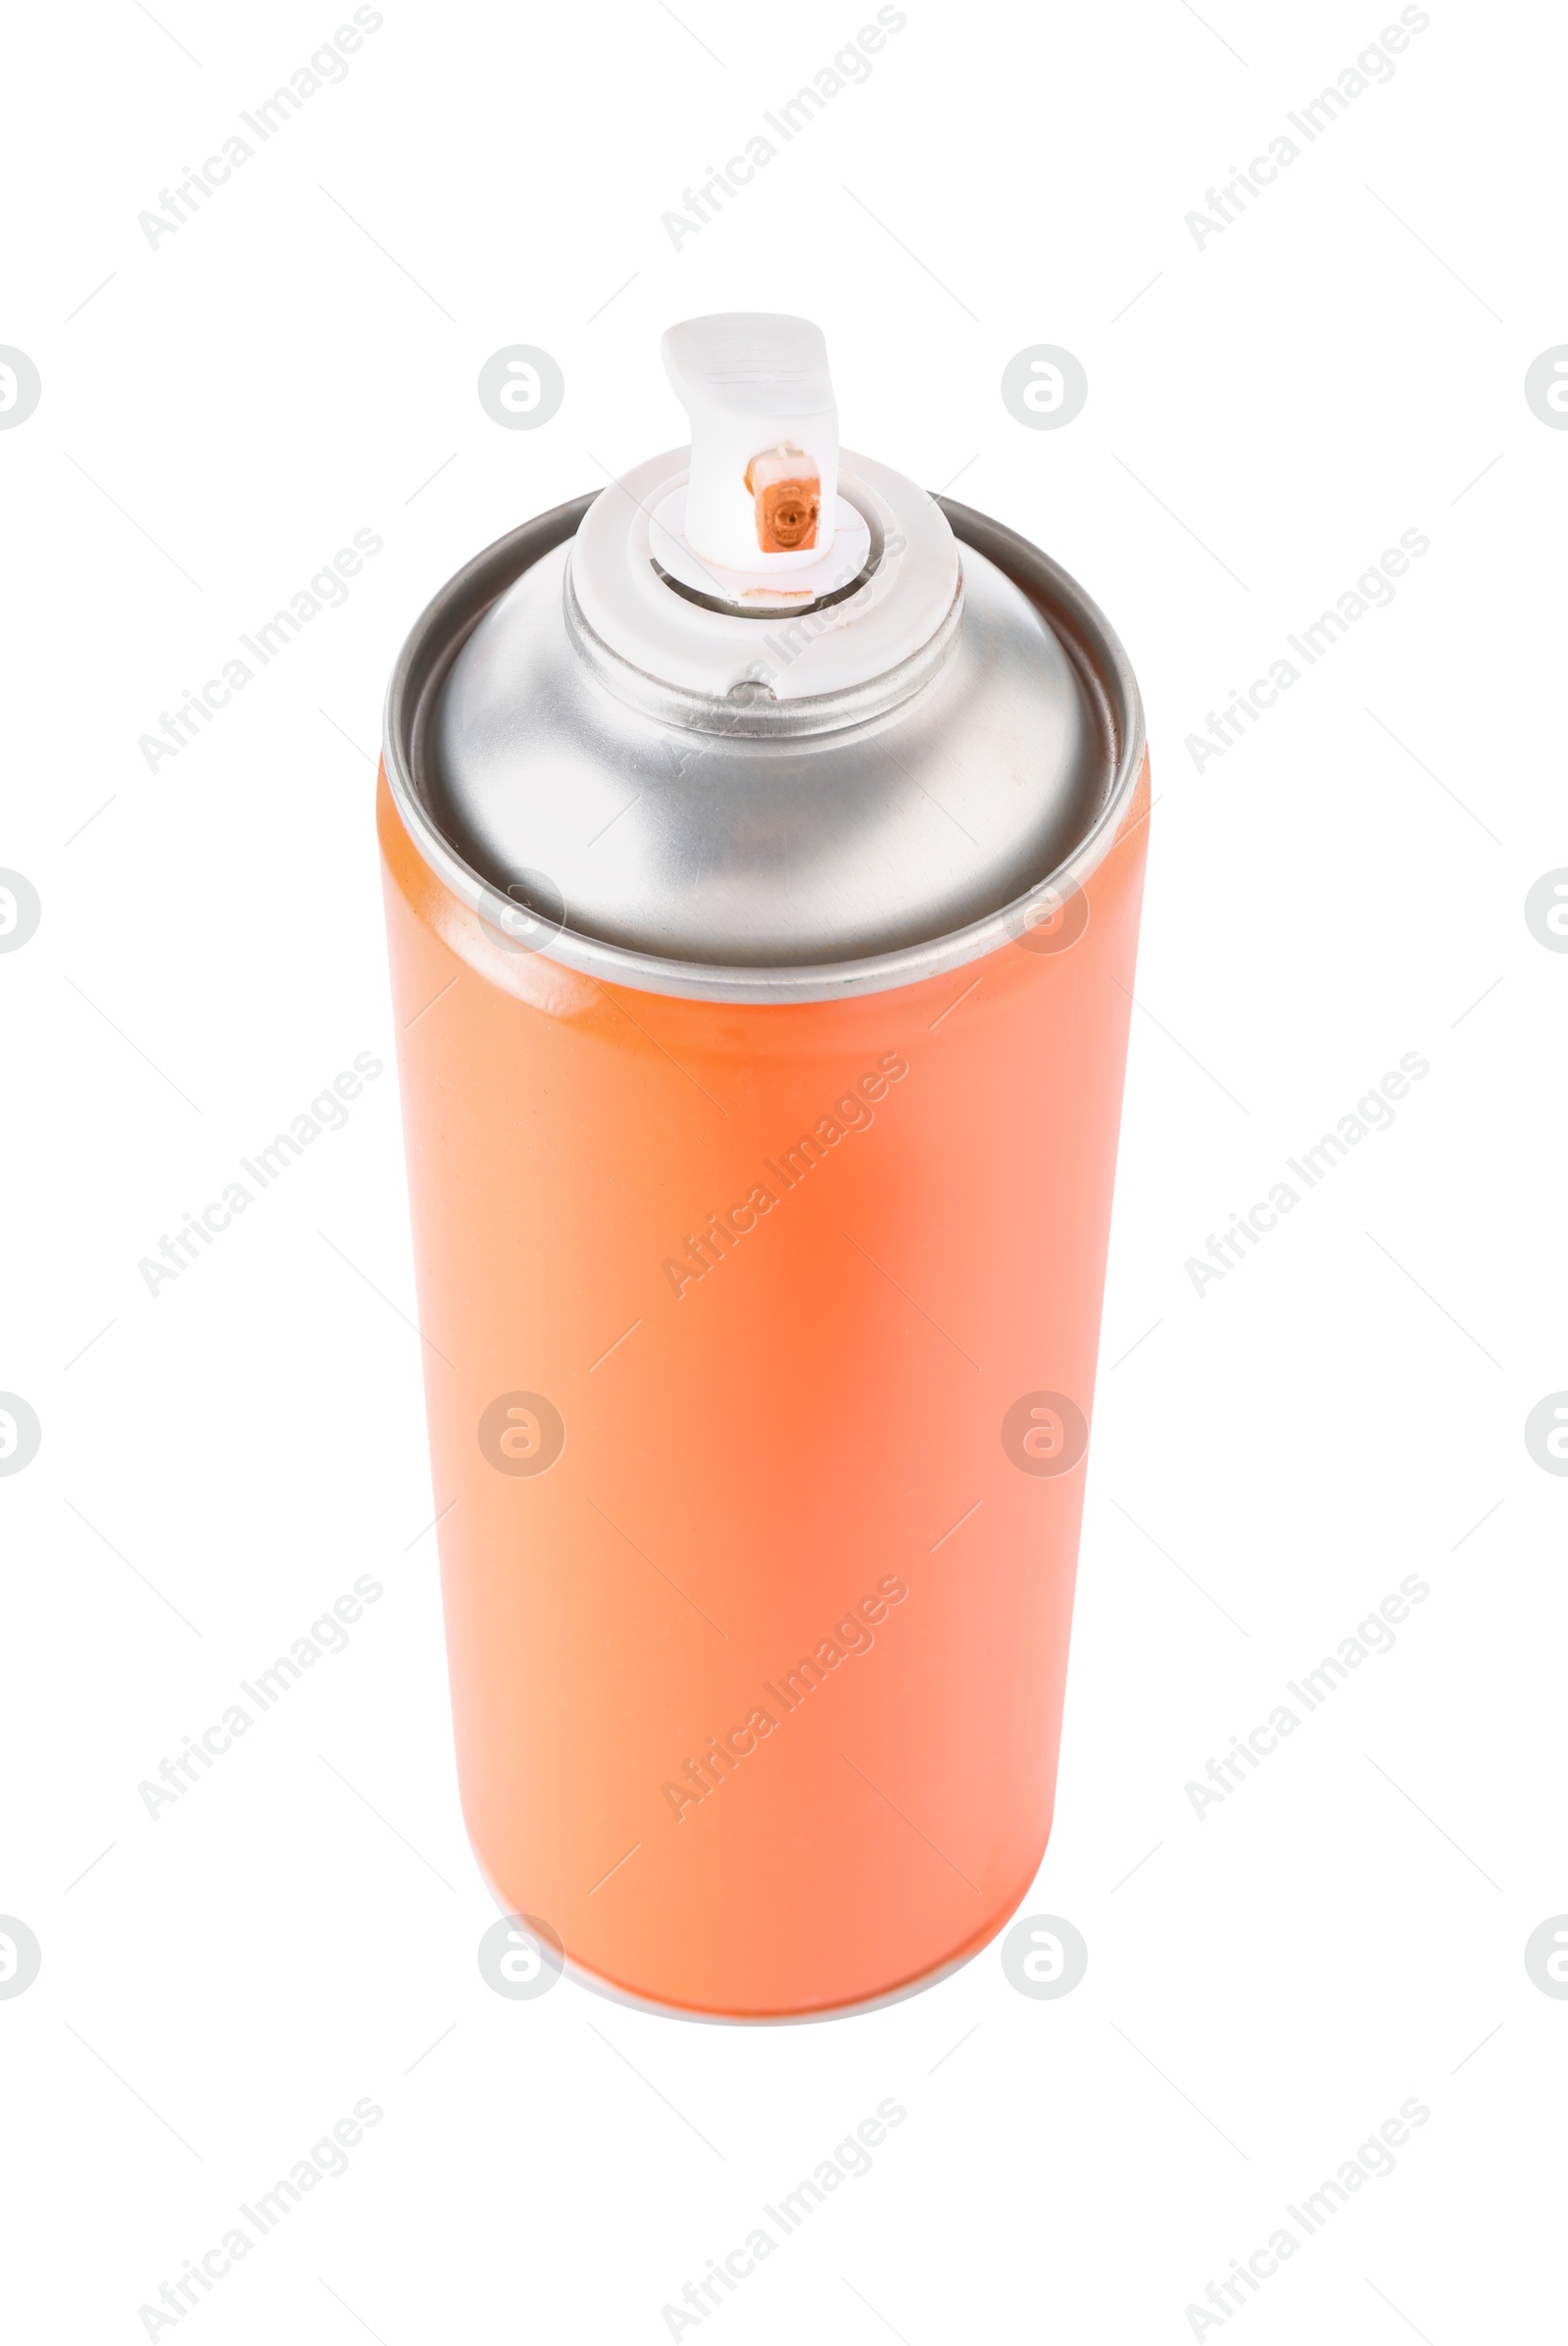 Photo of One orange spray paint can isolated on white